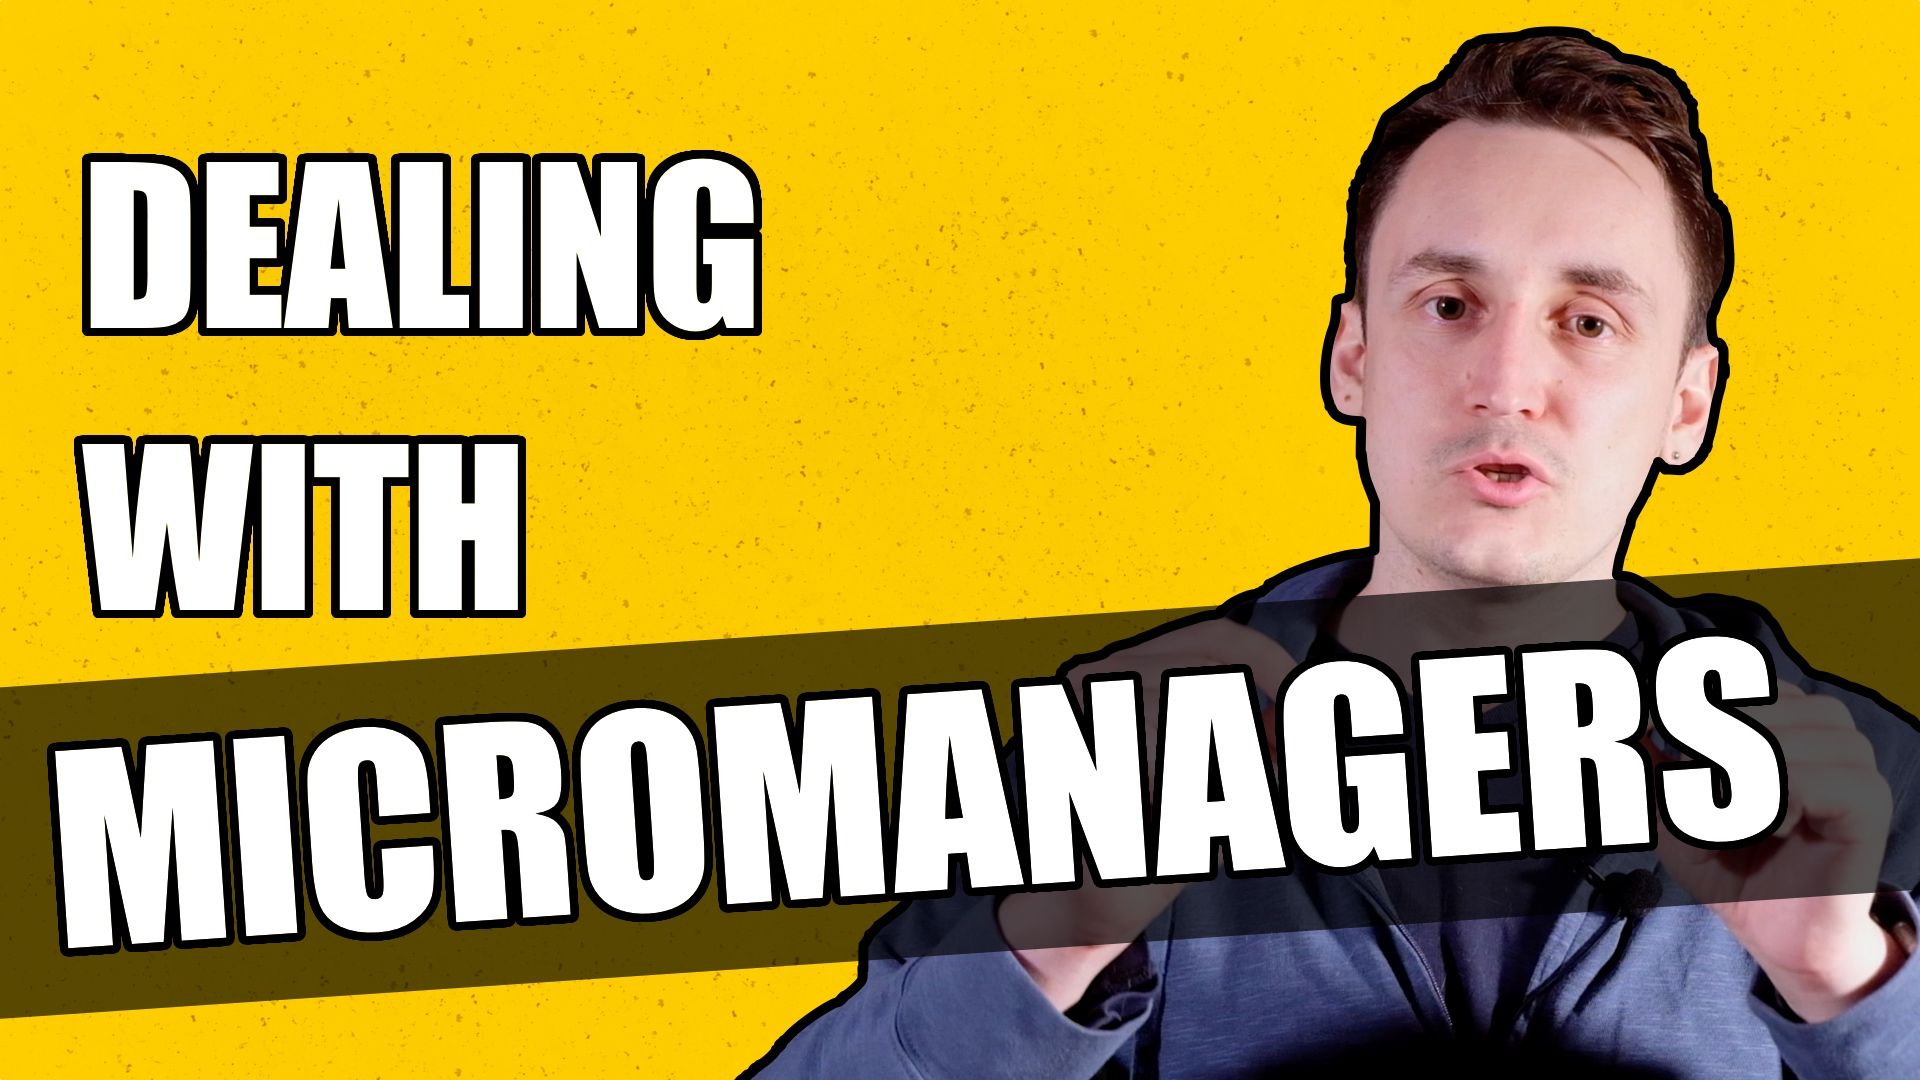 How to talk to micromanager